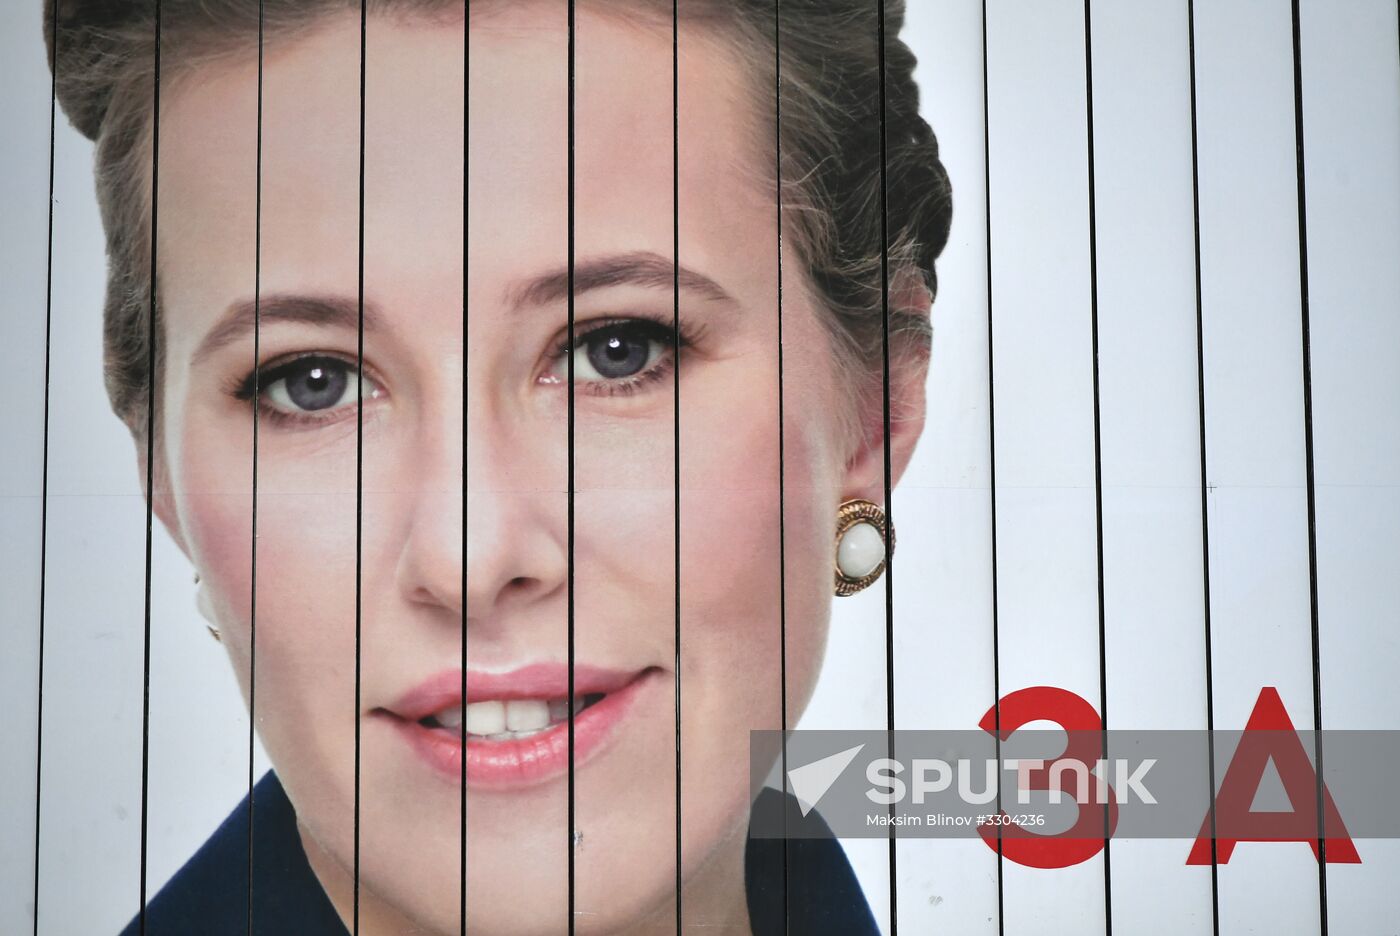 Campaign billboards in support of presidential candidate Ksenia Sobchak